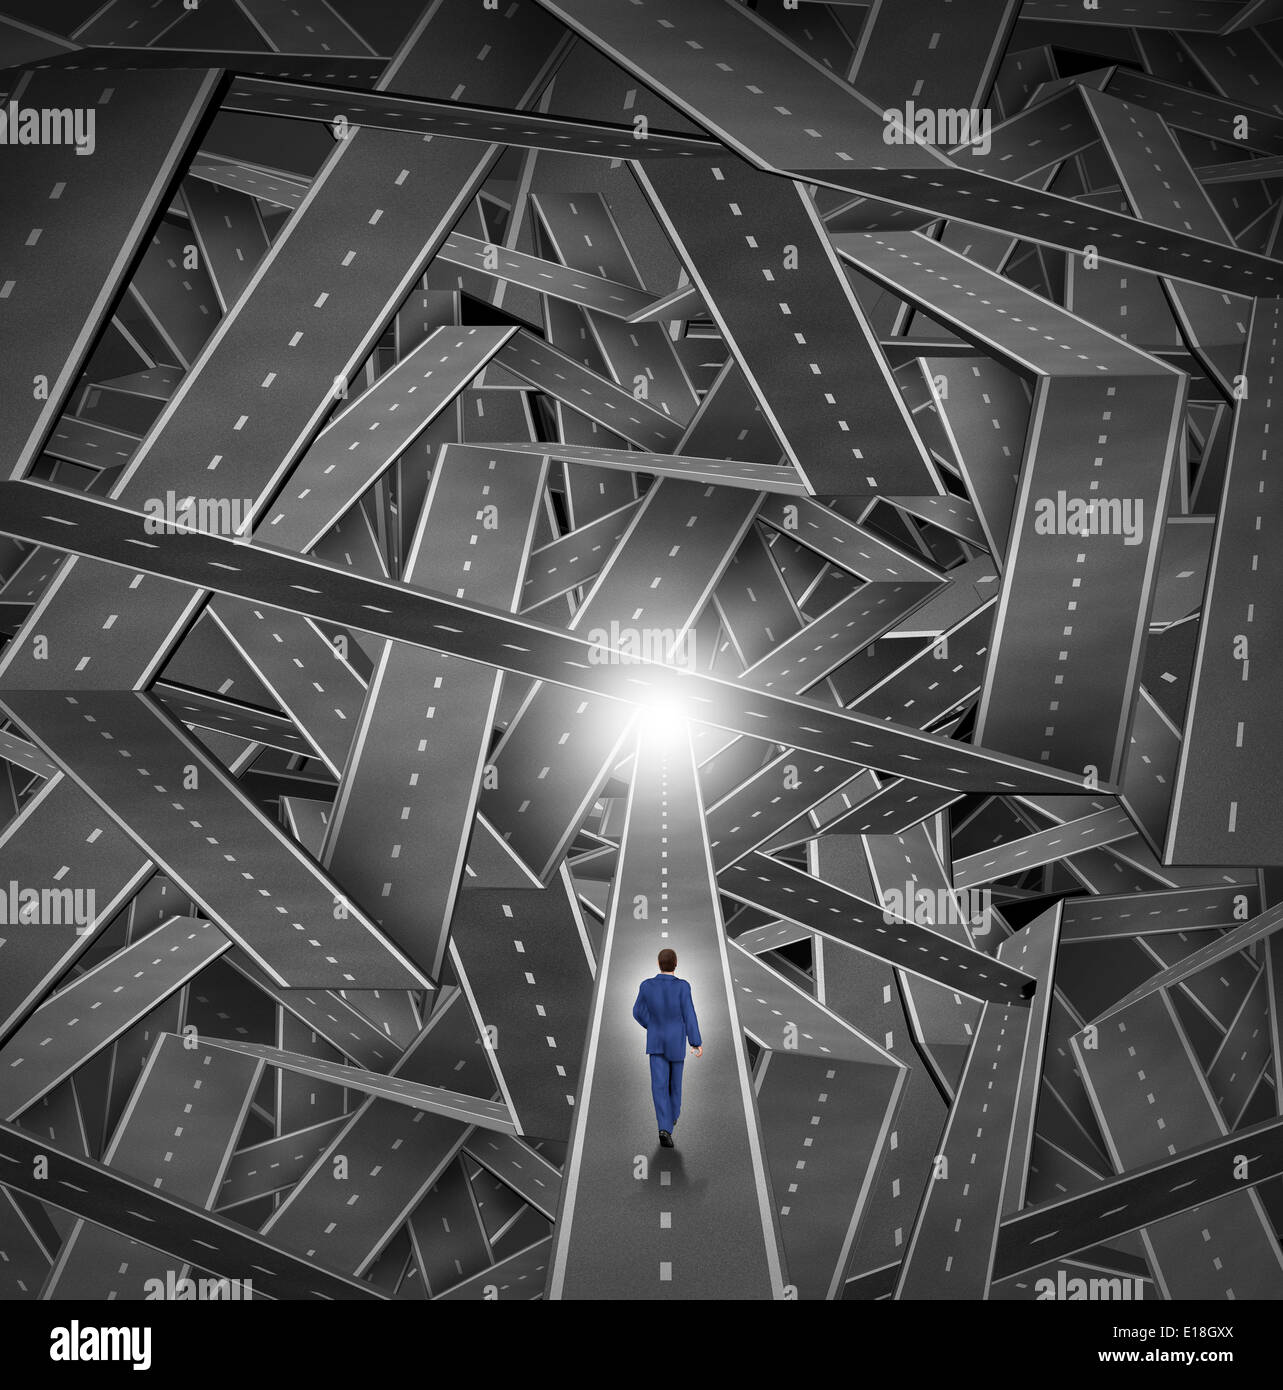 Crisis manager business concept as a businessman walkig through a maze and direction chaos with a mountain of tangled sharp turn roads as a financial metaphor for managing challenging organization situations with courage and expertise. Stock Photo